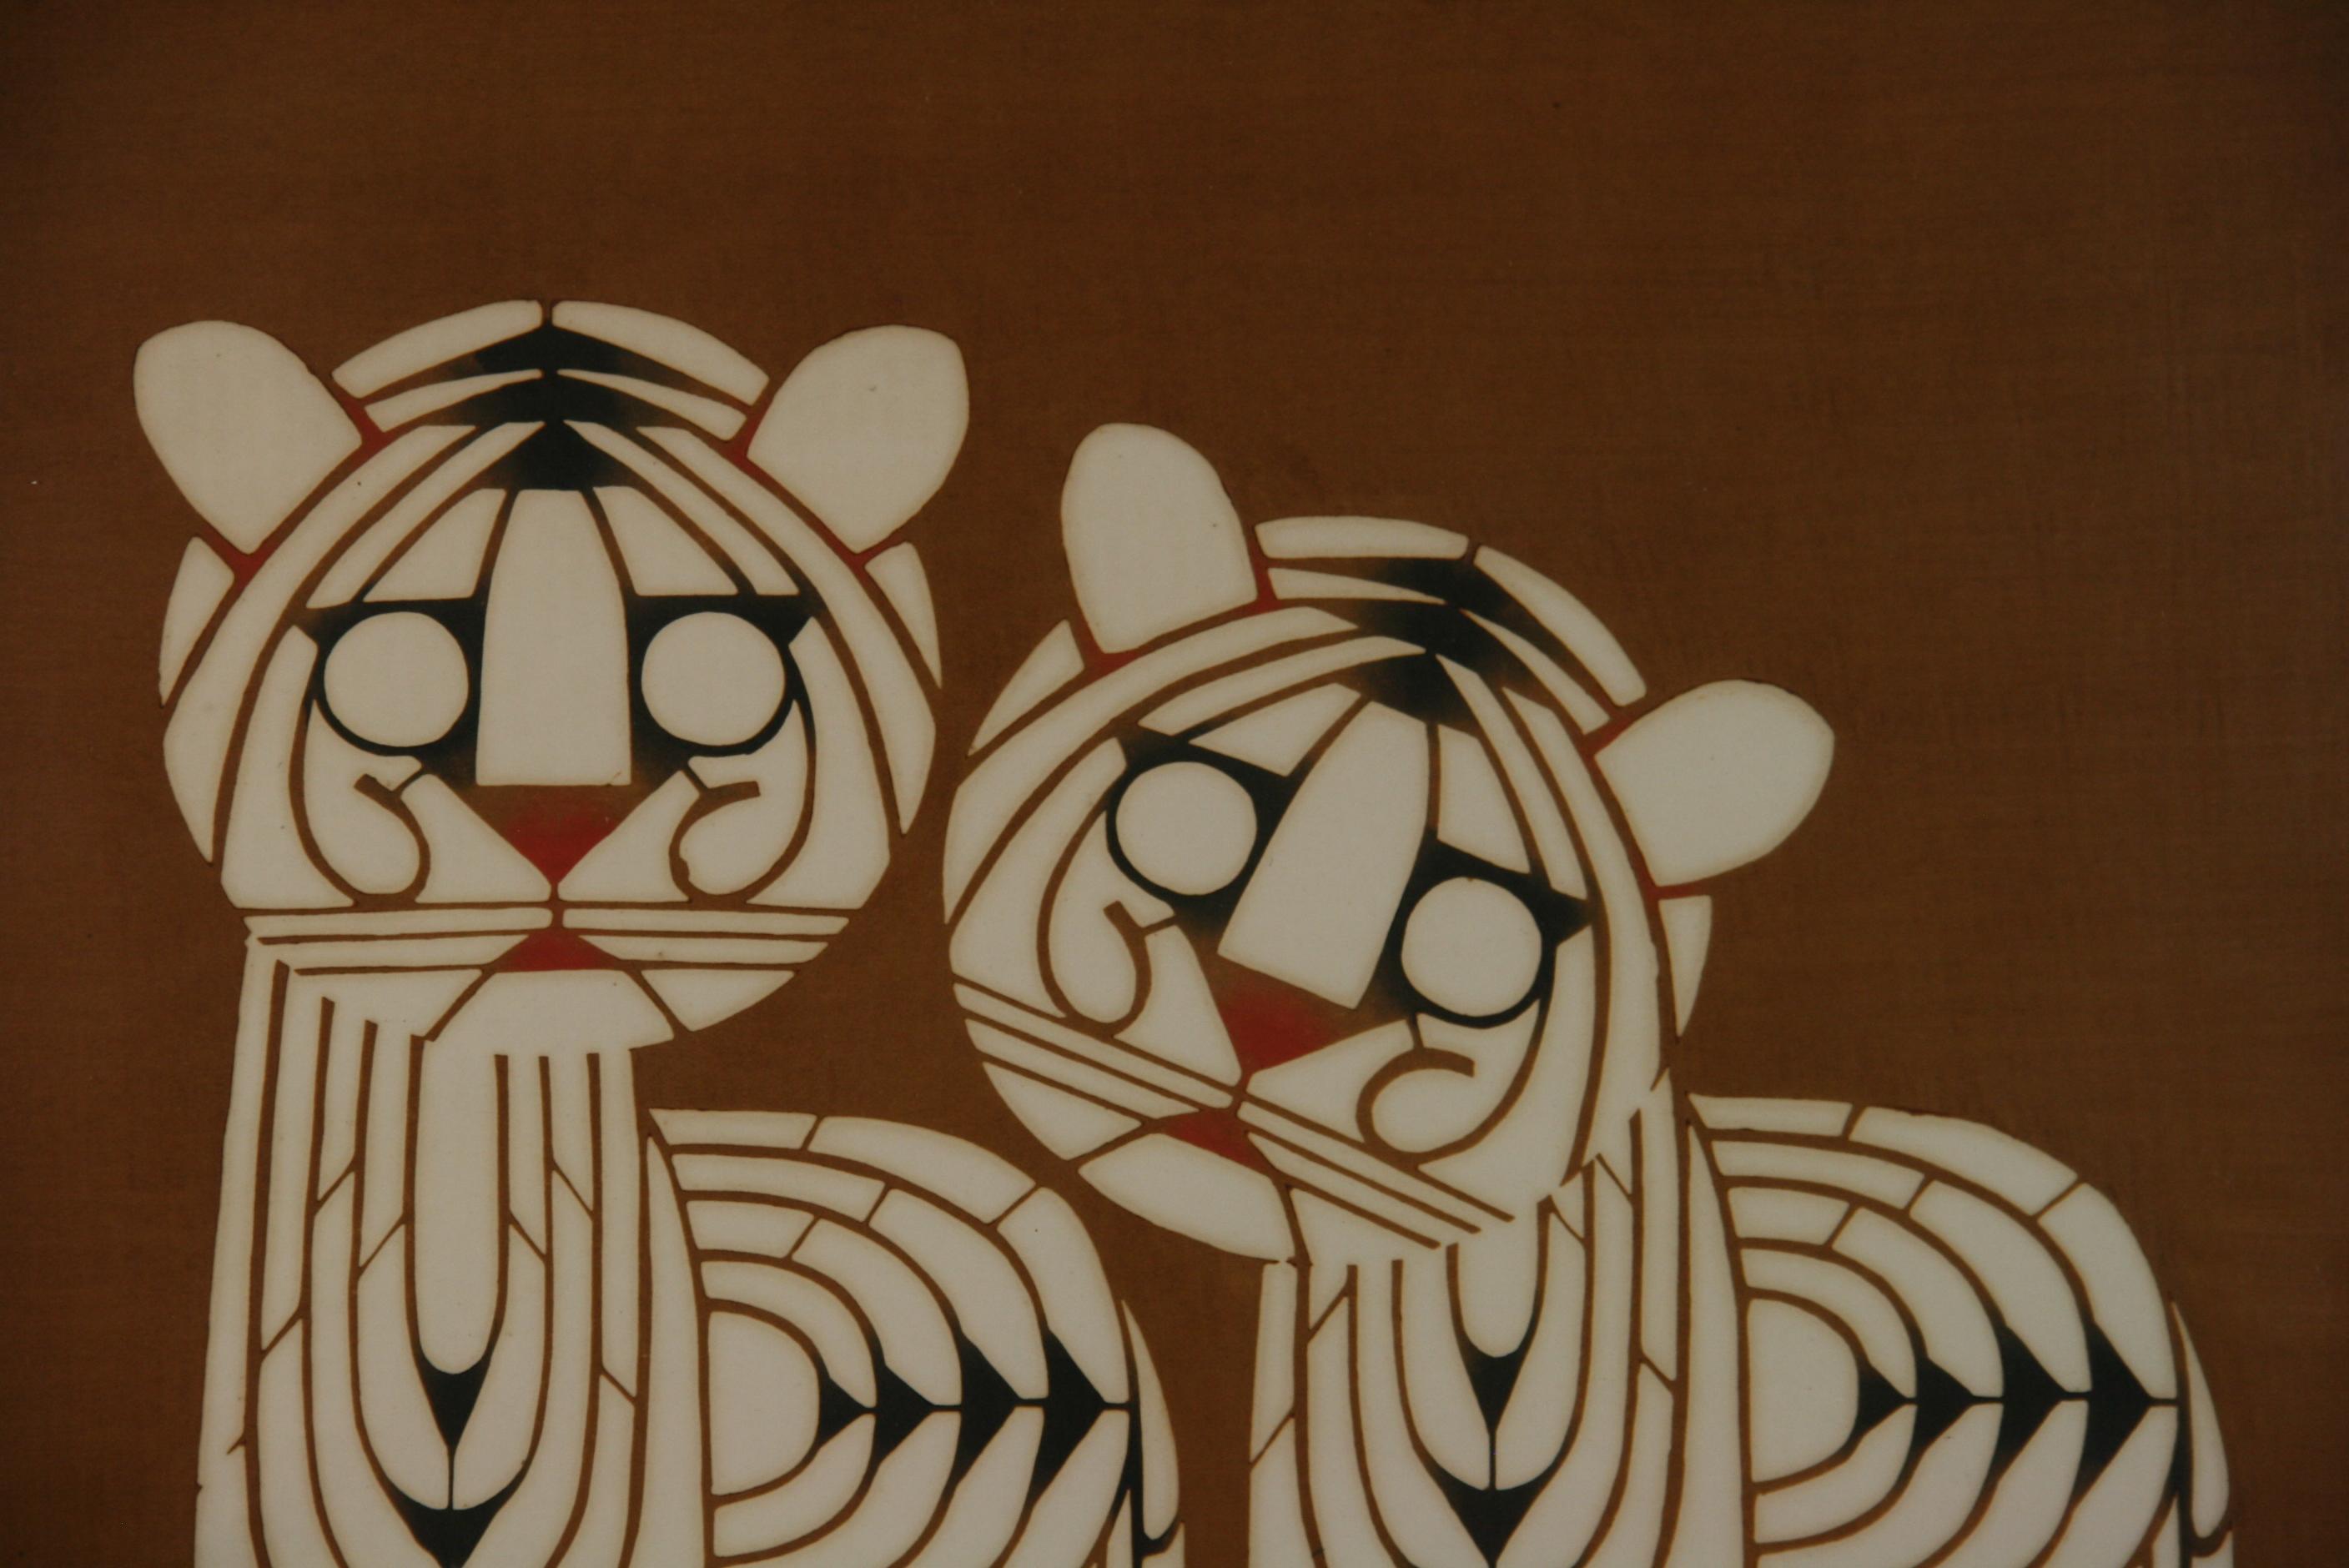 Mid-20th Century Japanese Two Tigers Serigraph #5 By Inikumo 1967